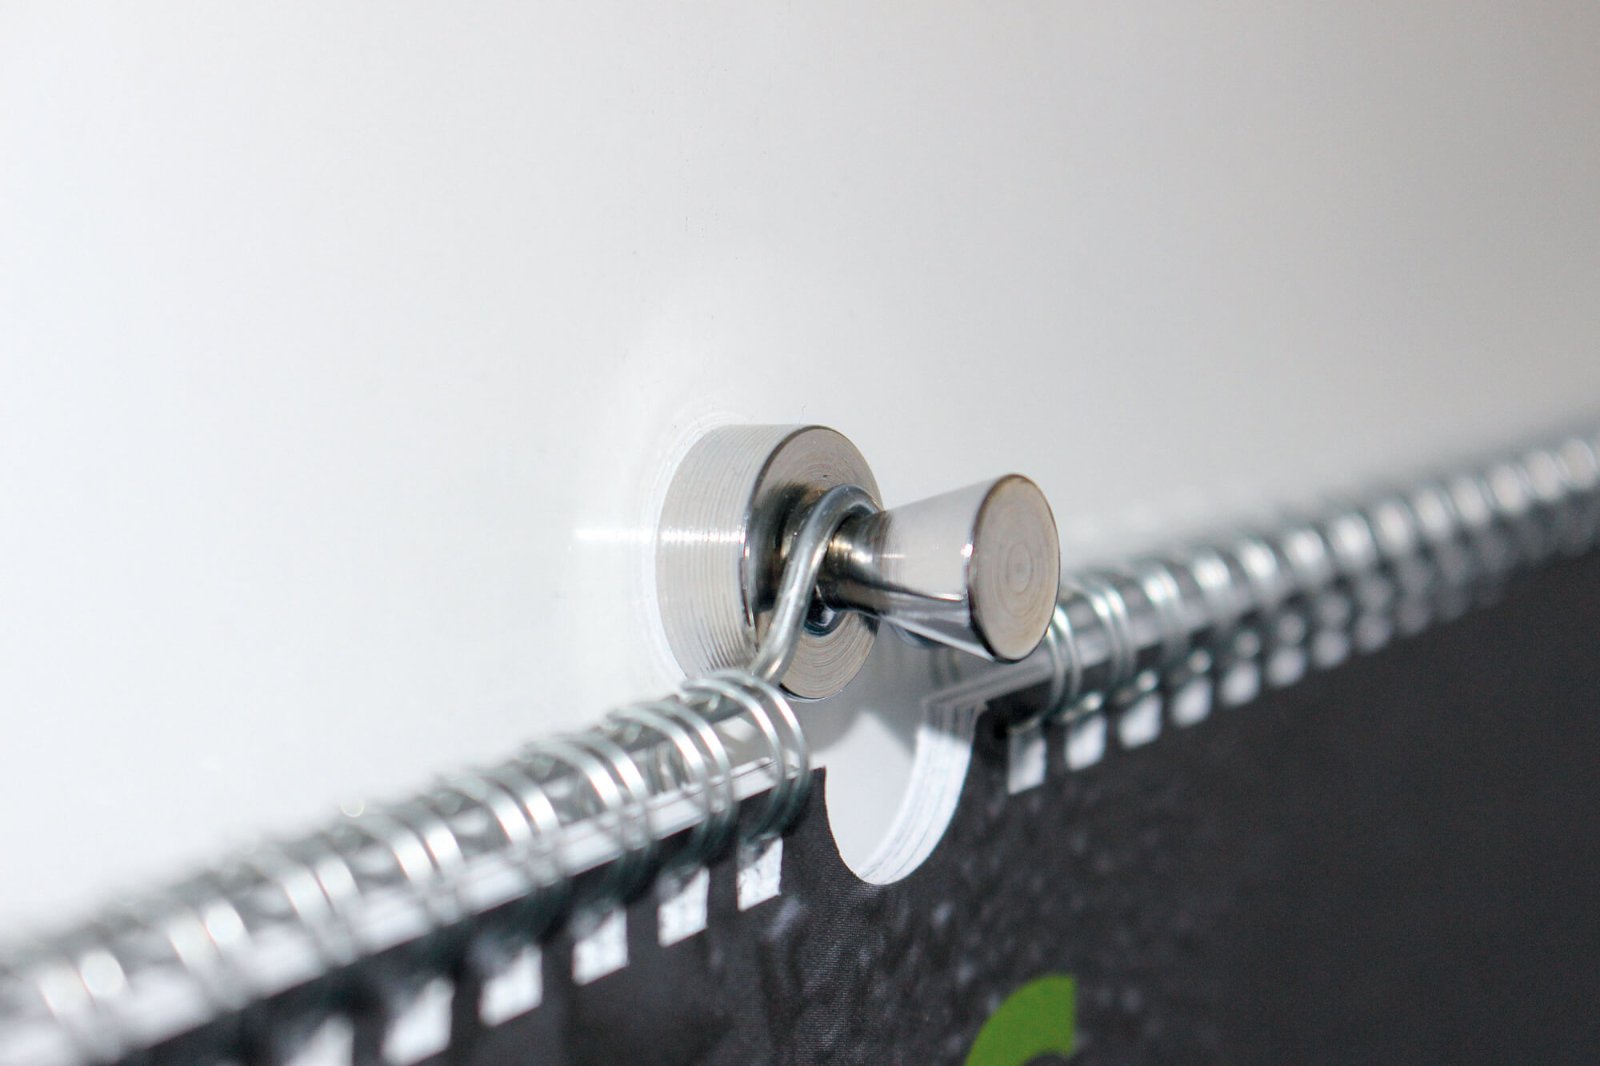 Magnetic pins